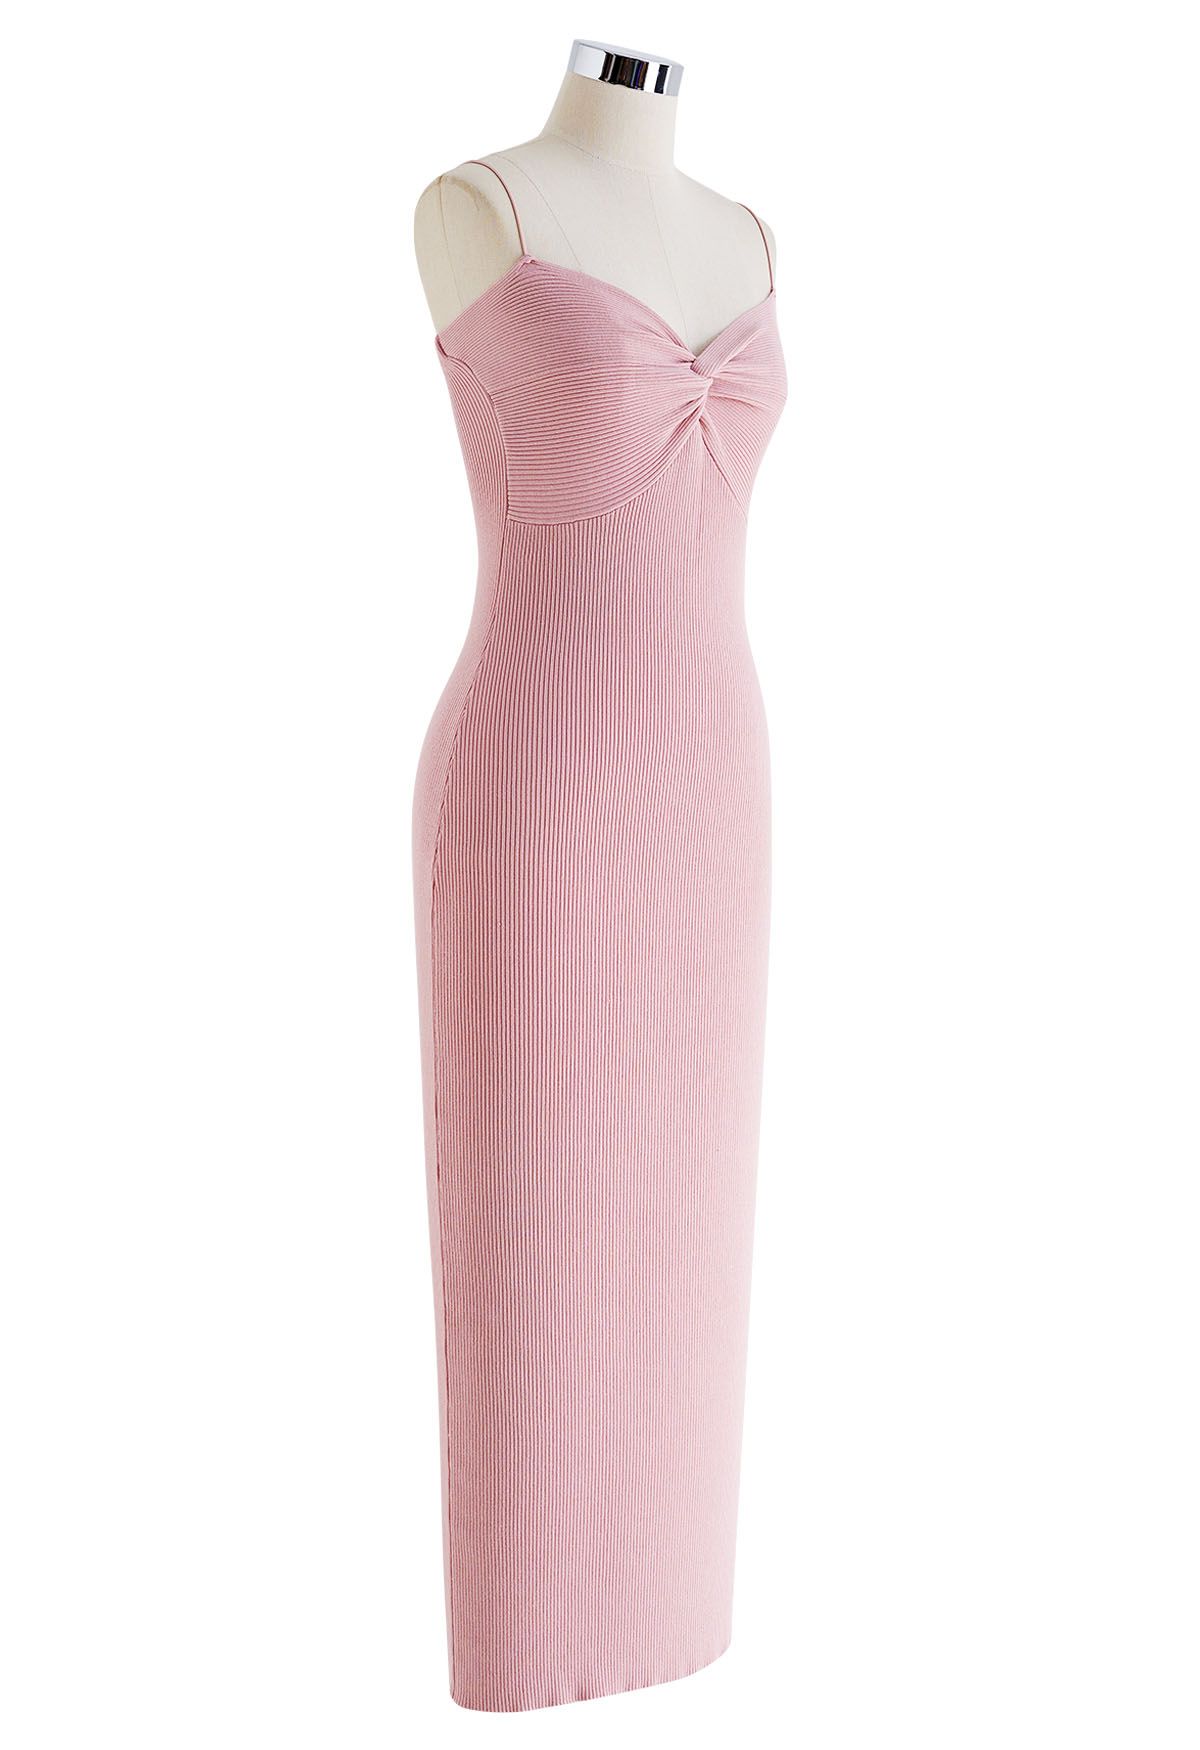 Twist Front Bodycon Knit Cami Dress in Pink